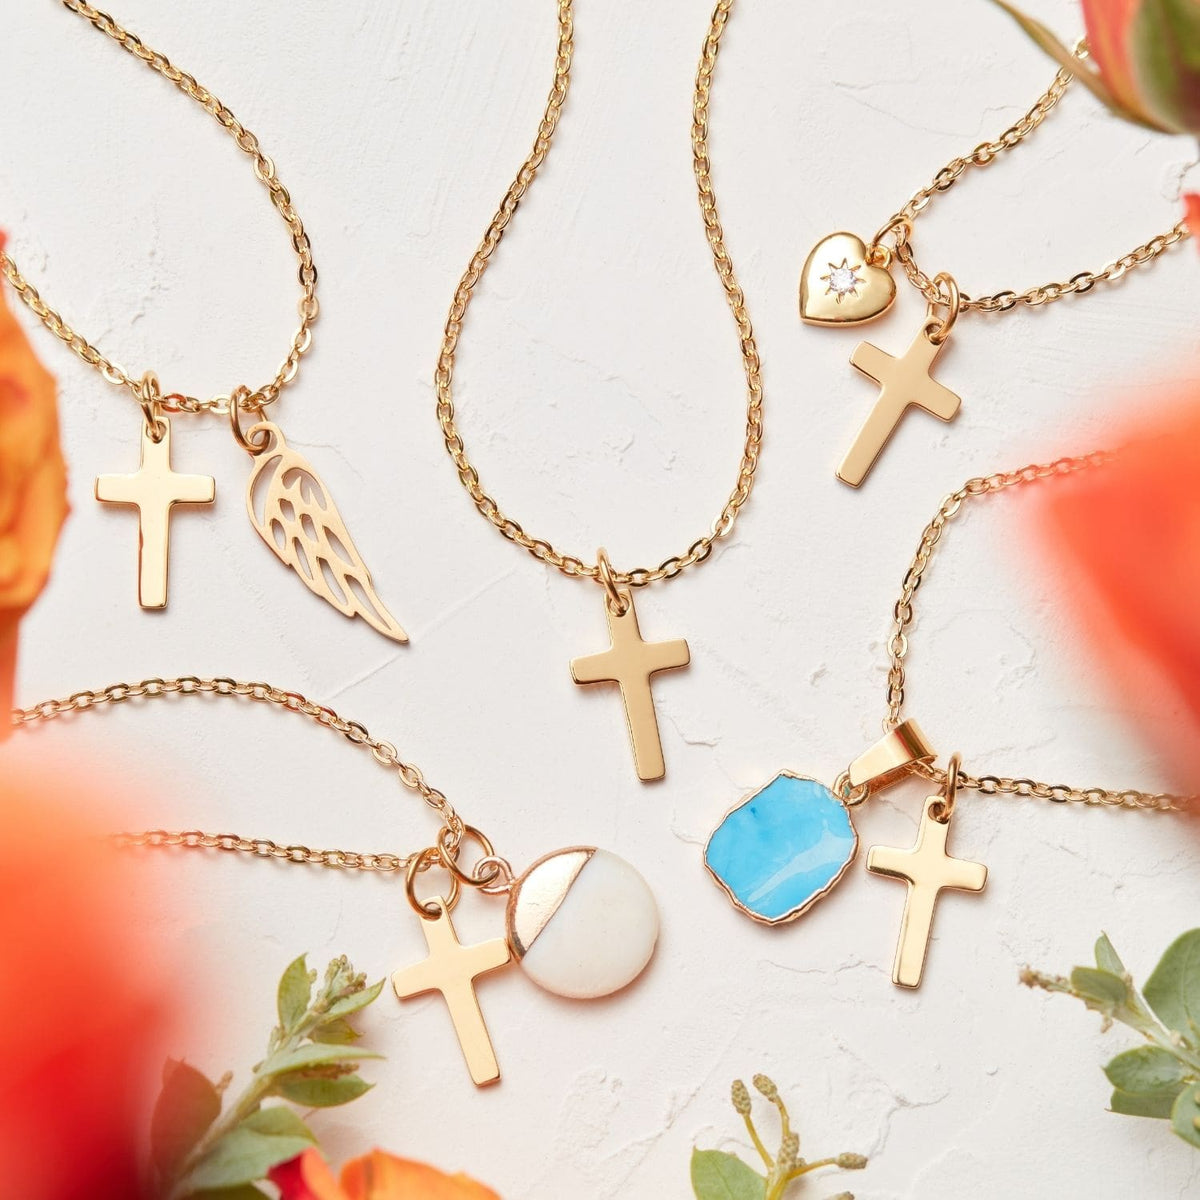 To the Mother of the Bride (From Daughter) | Today a Bride, Tomorrow a Wife | Cross Necklace